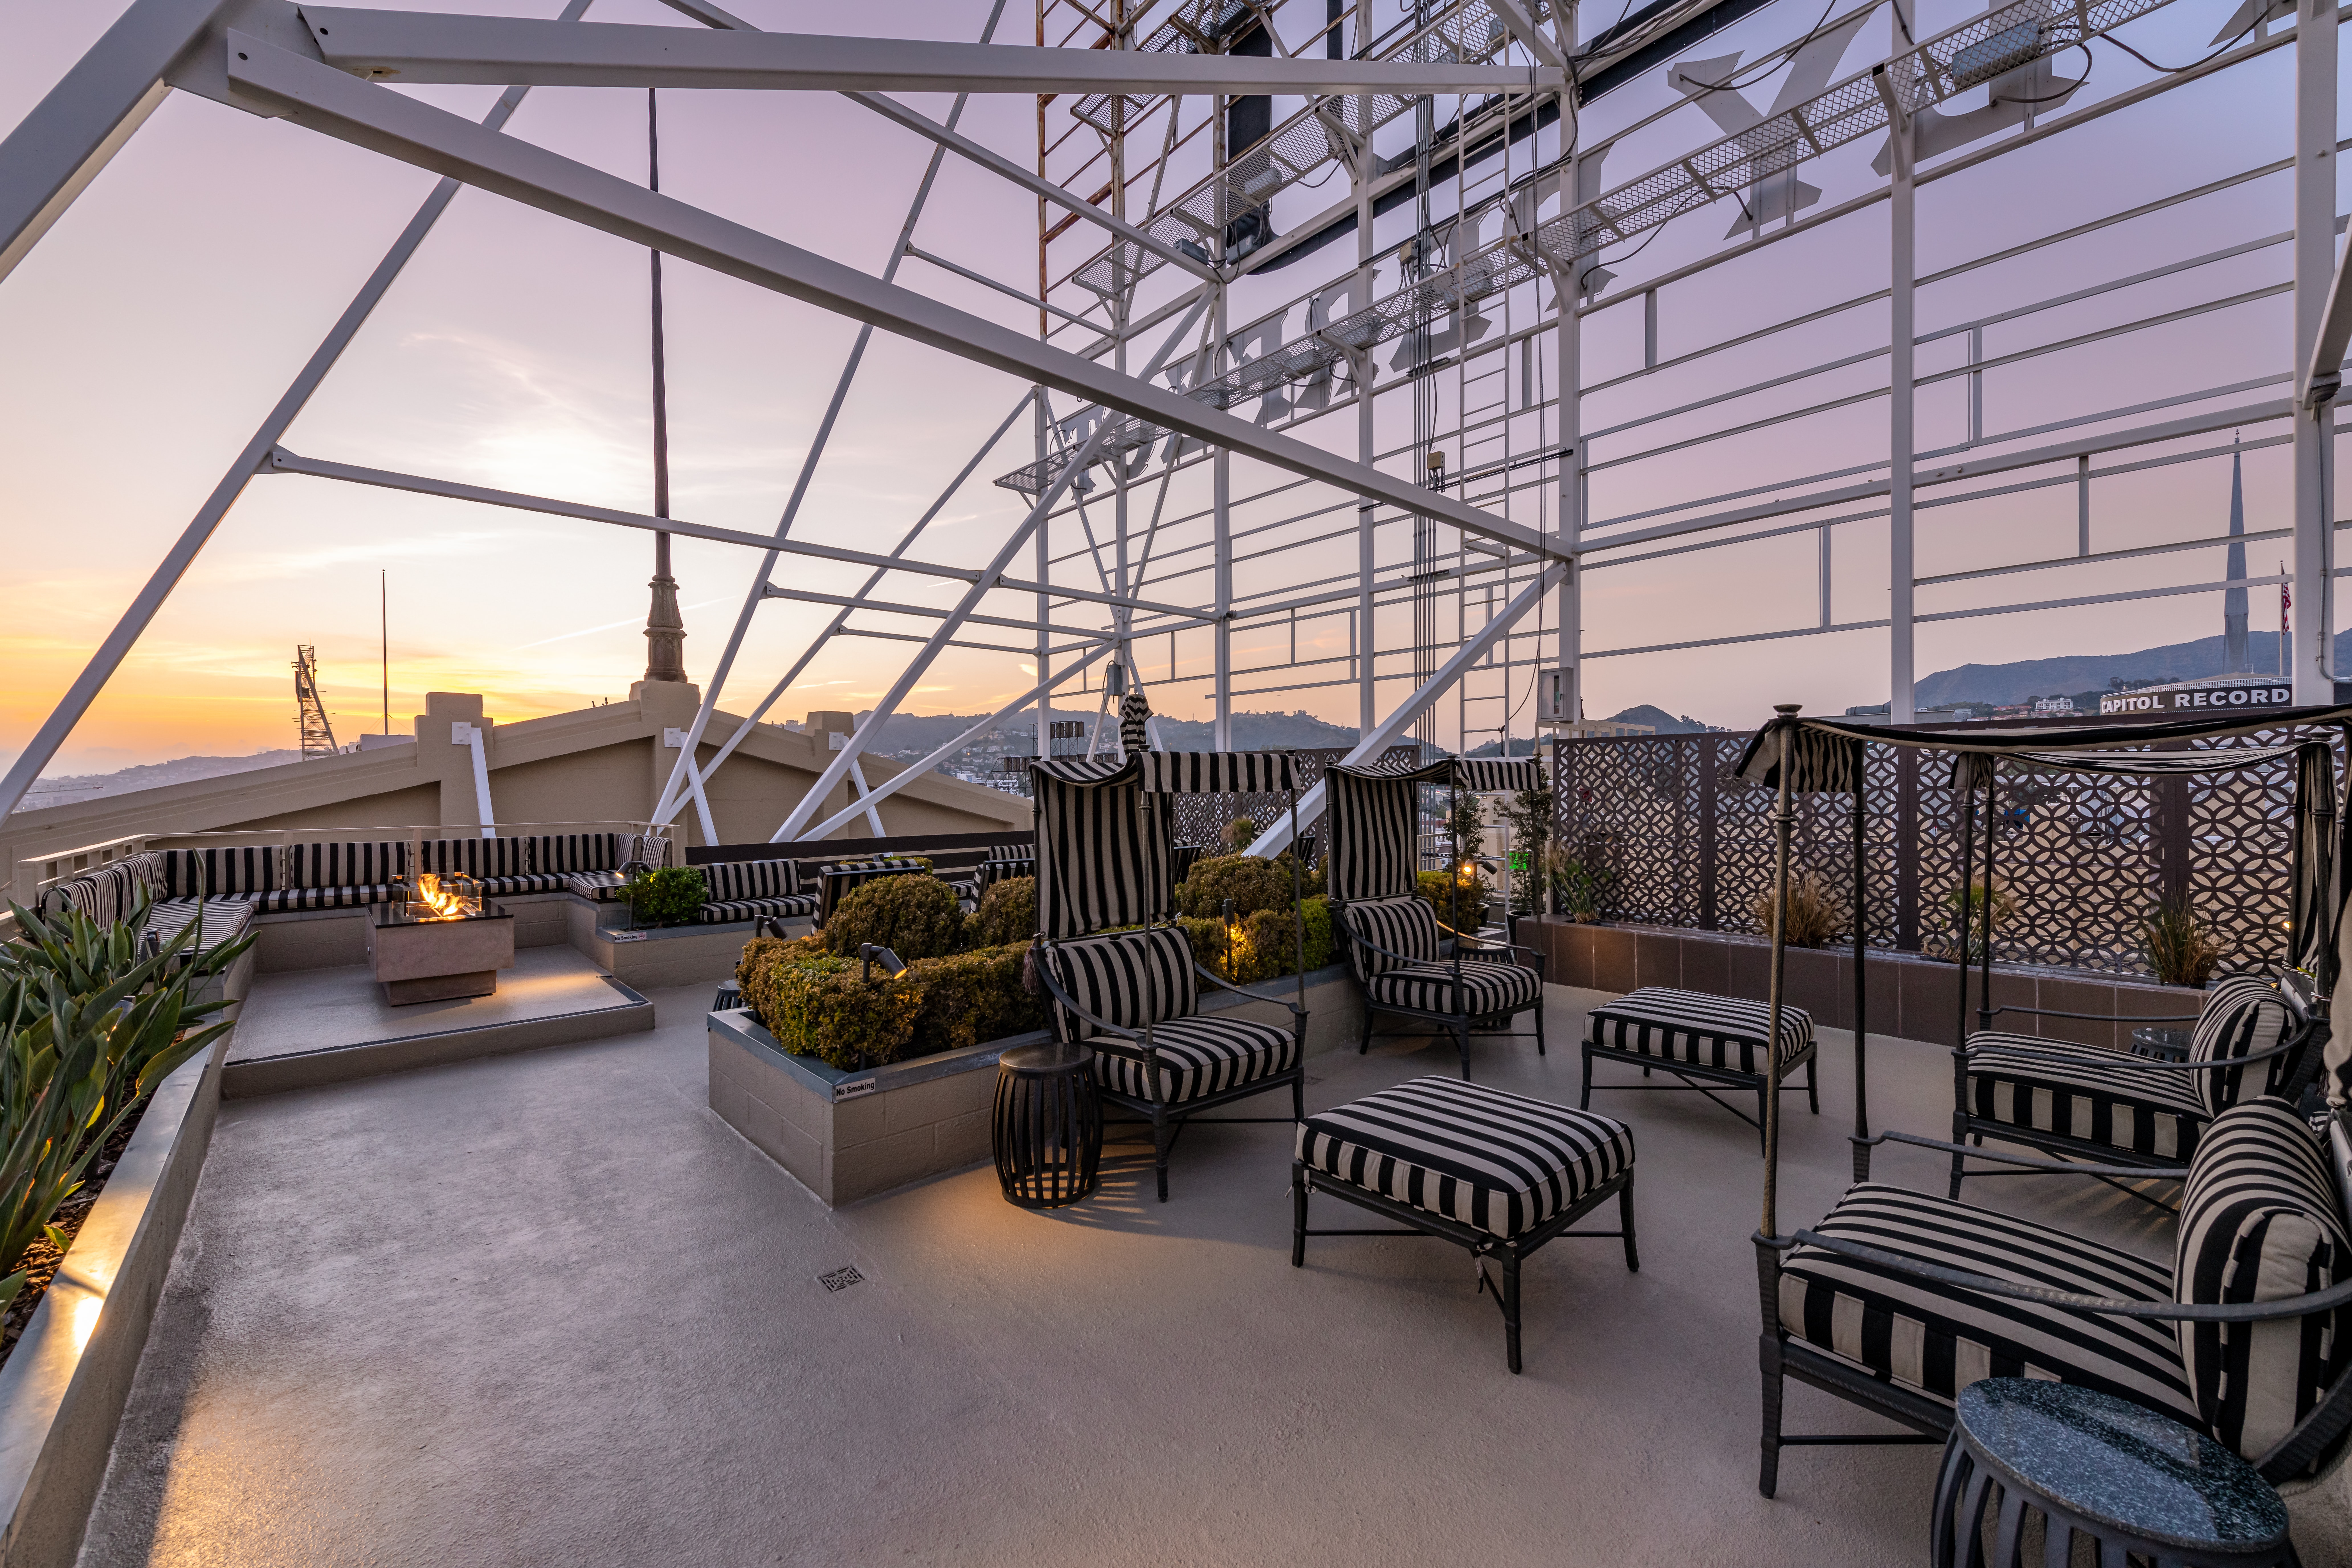 Historic Lofts at Hollywood. Cozy seating and firepits to enjoy breathtaking city views from this magnificent roof top patio area.